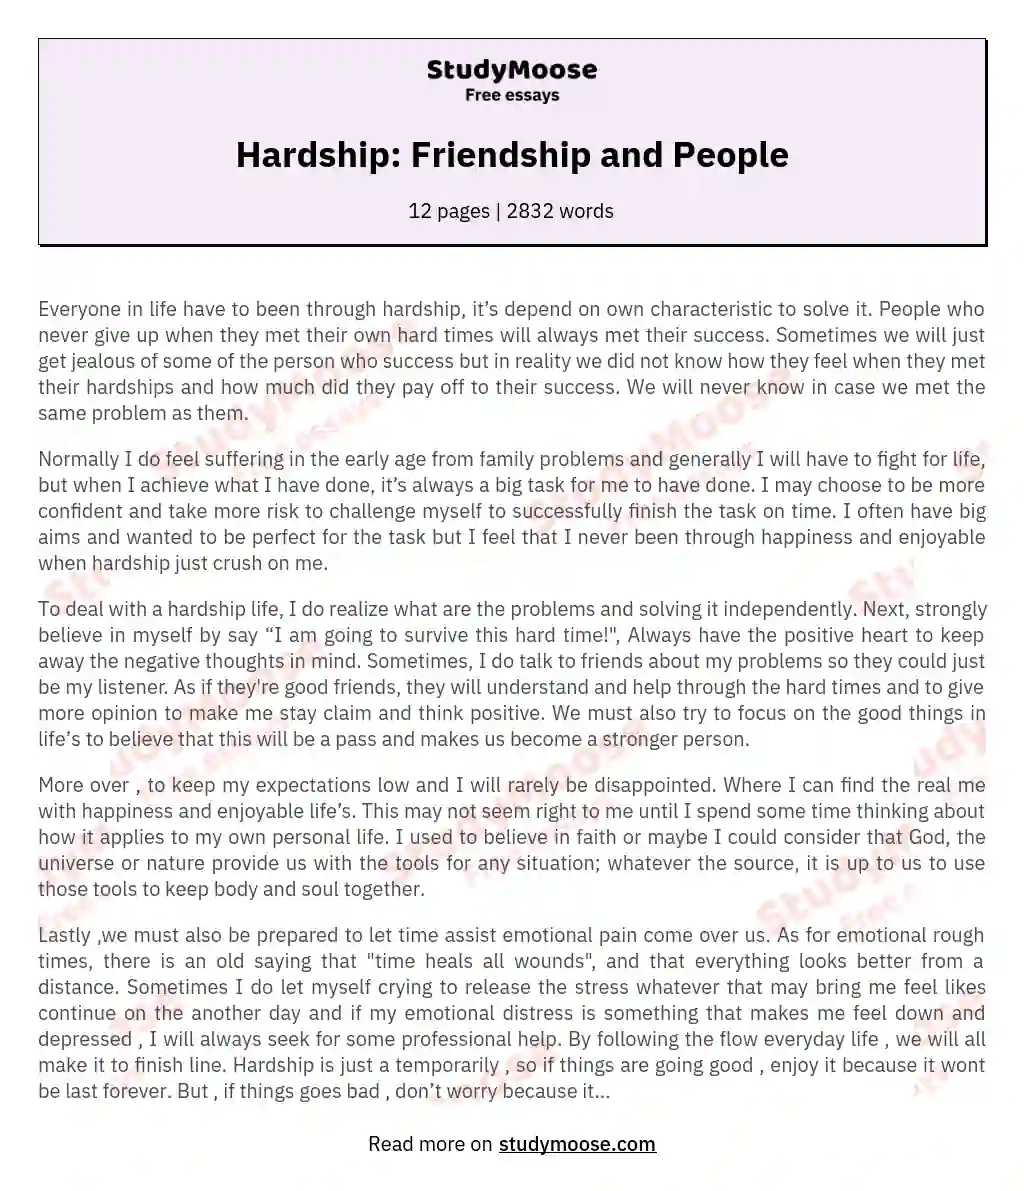 Hardship: Friendship and People essay